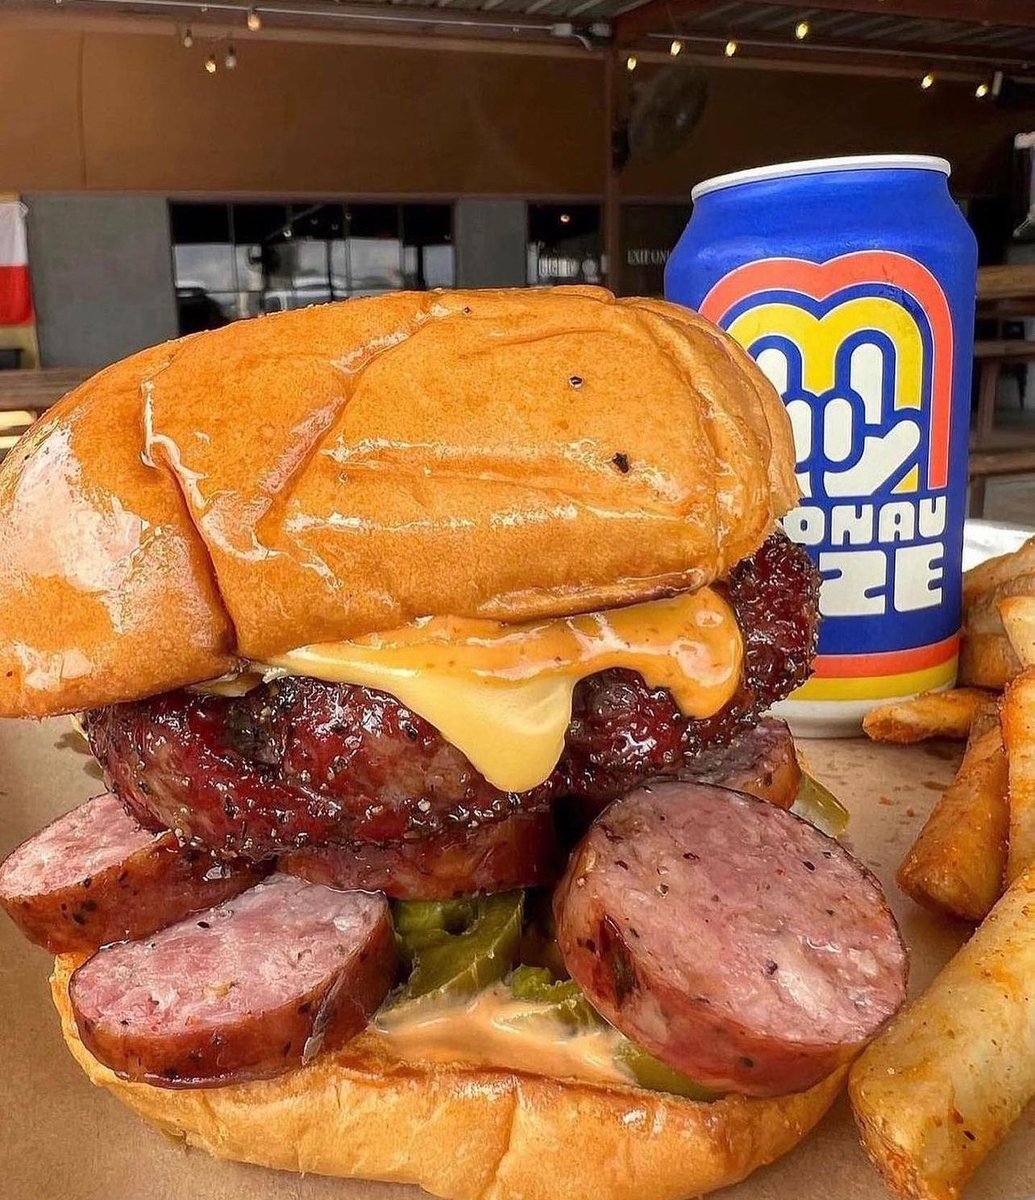 Today! The Diablo Smoked Brisket Cheeseburger! 🍔 House Ground & Smoked Brisket Burger. Topped w sliced Switch original sausage. Dressed w American Cheese, pickled jalapenos, & Diablo Sauce. choice of Homemade Onion Rings or Hawg Rub seasoned French Fries. #TexasBBQ #BBQ #Austin